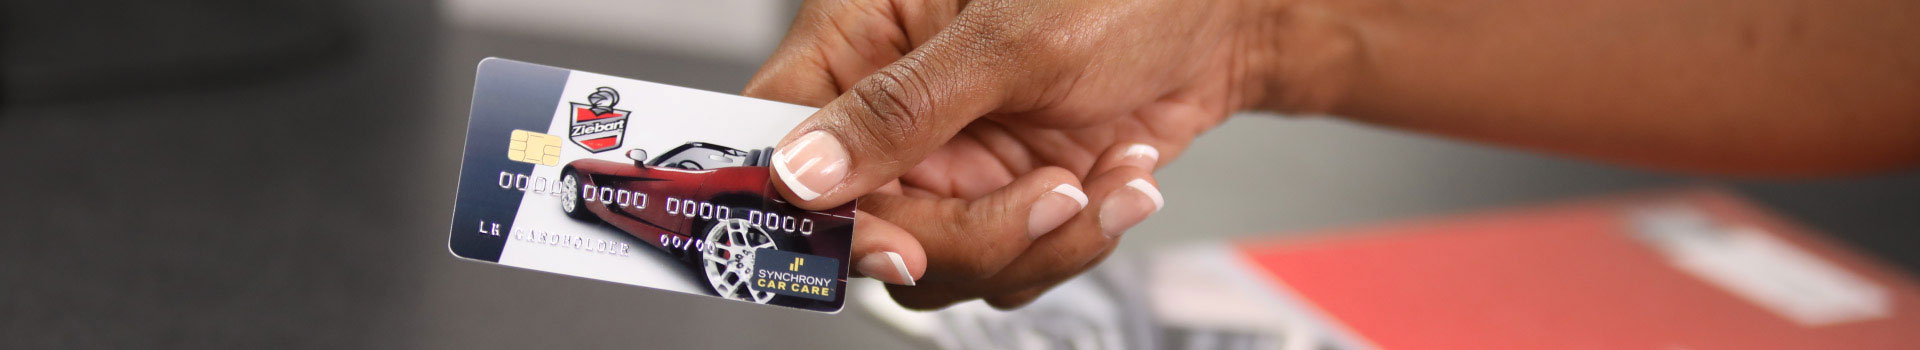 Hands holding a Ziebart credit card